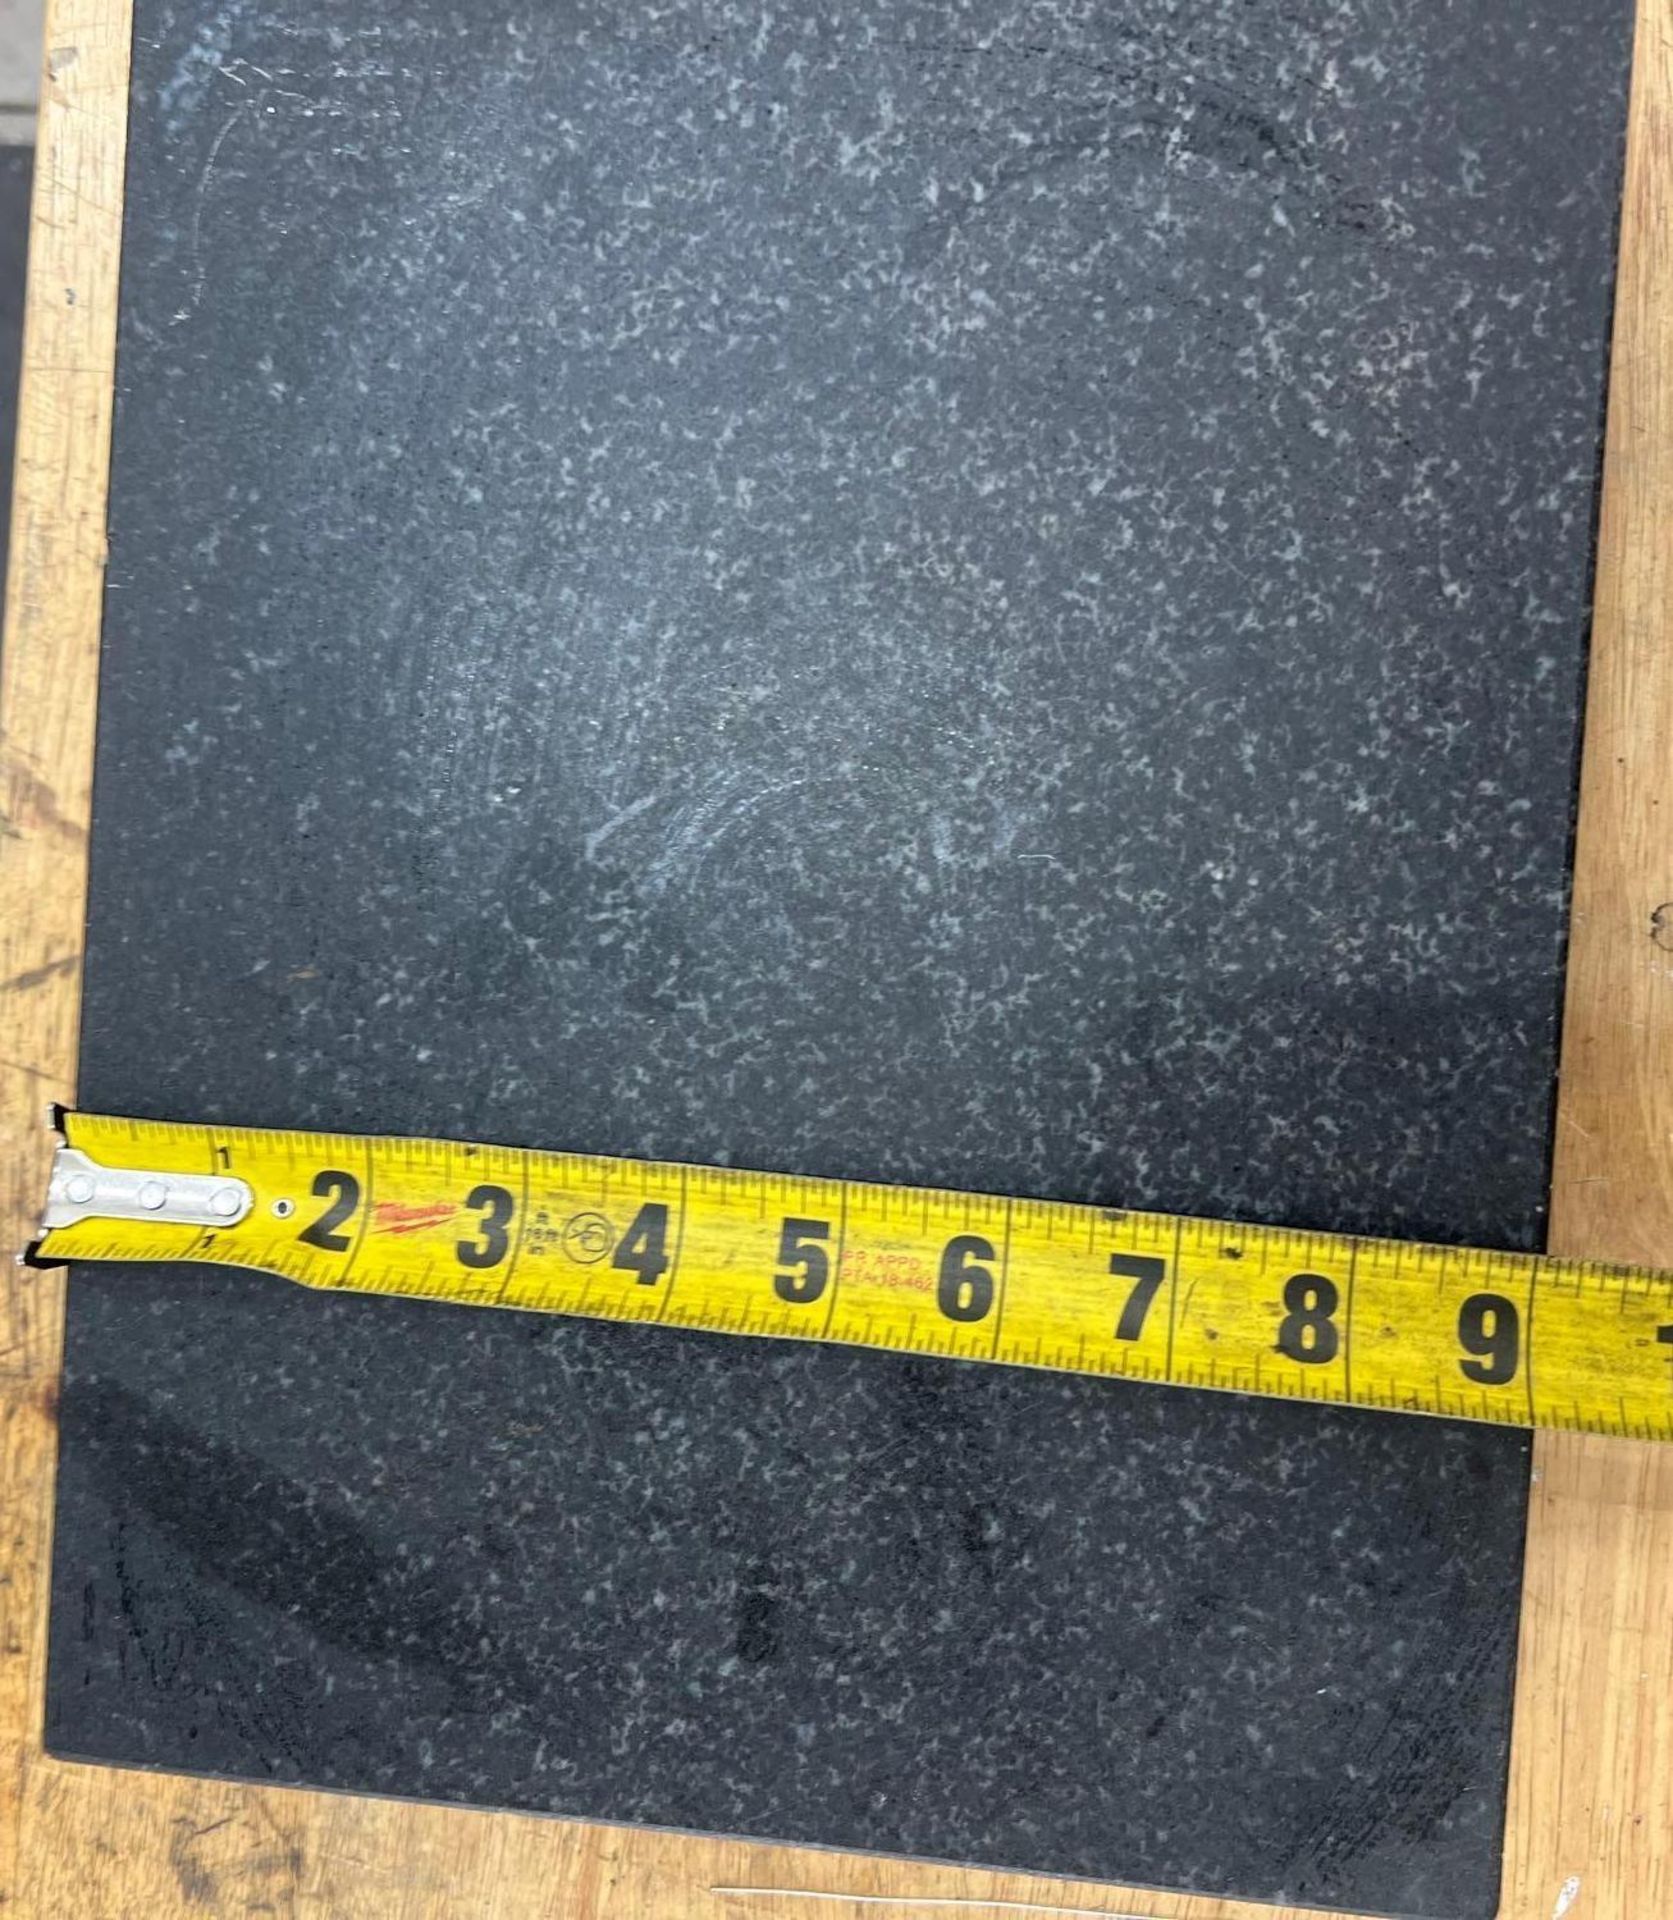 12"x9"x2" Granite Inspection Plate - Image 5 of 7